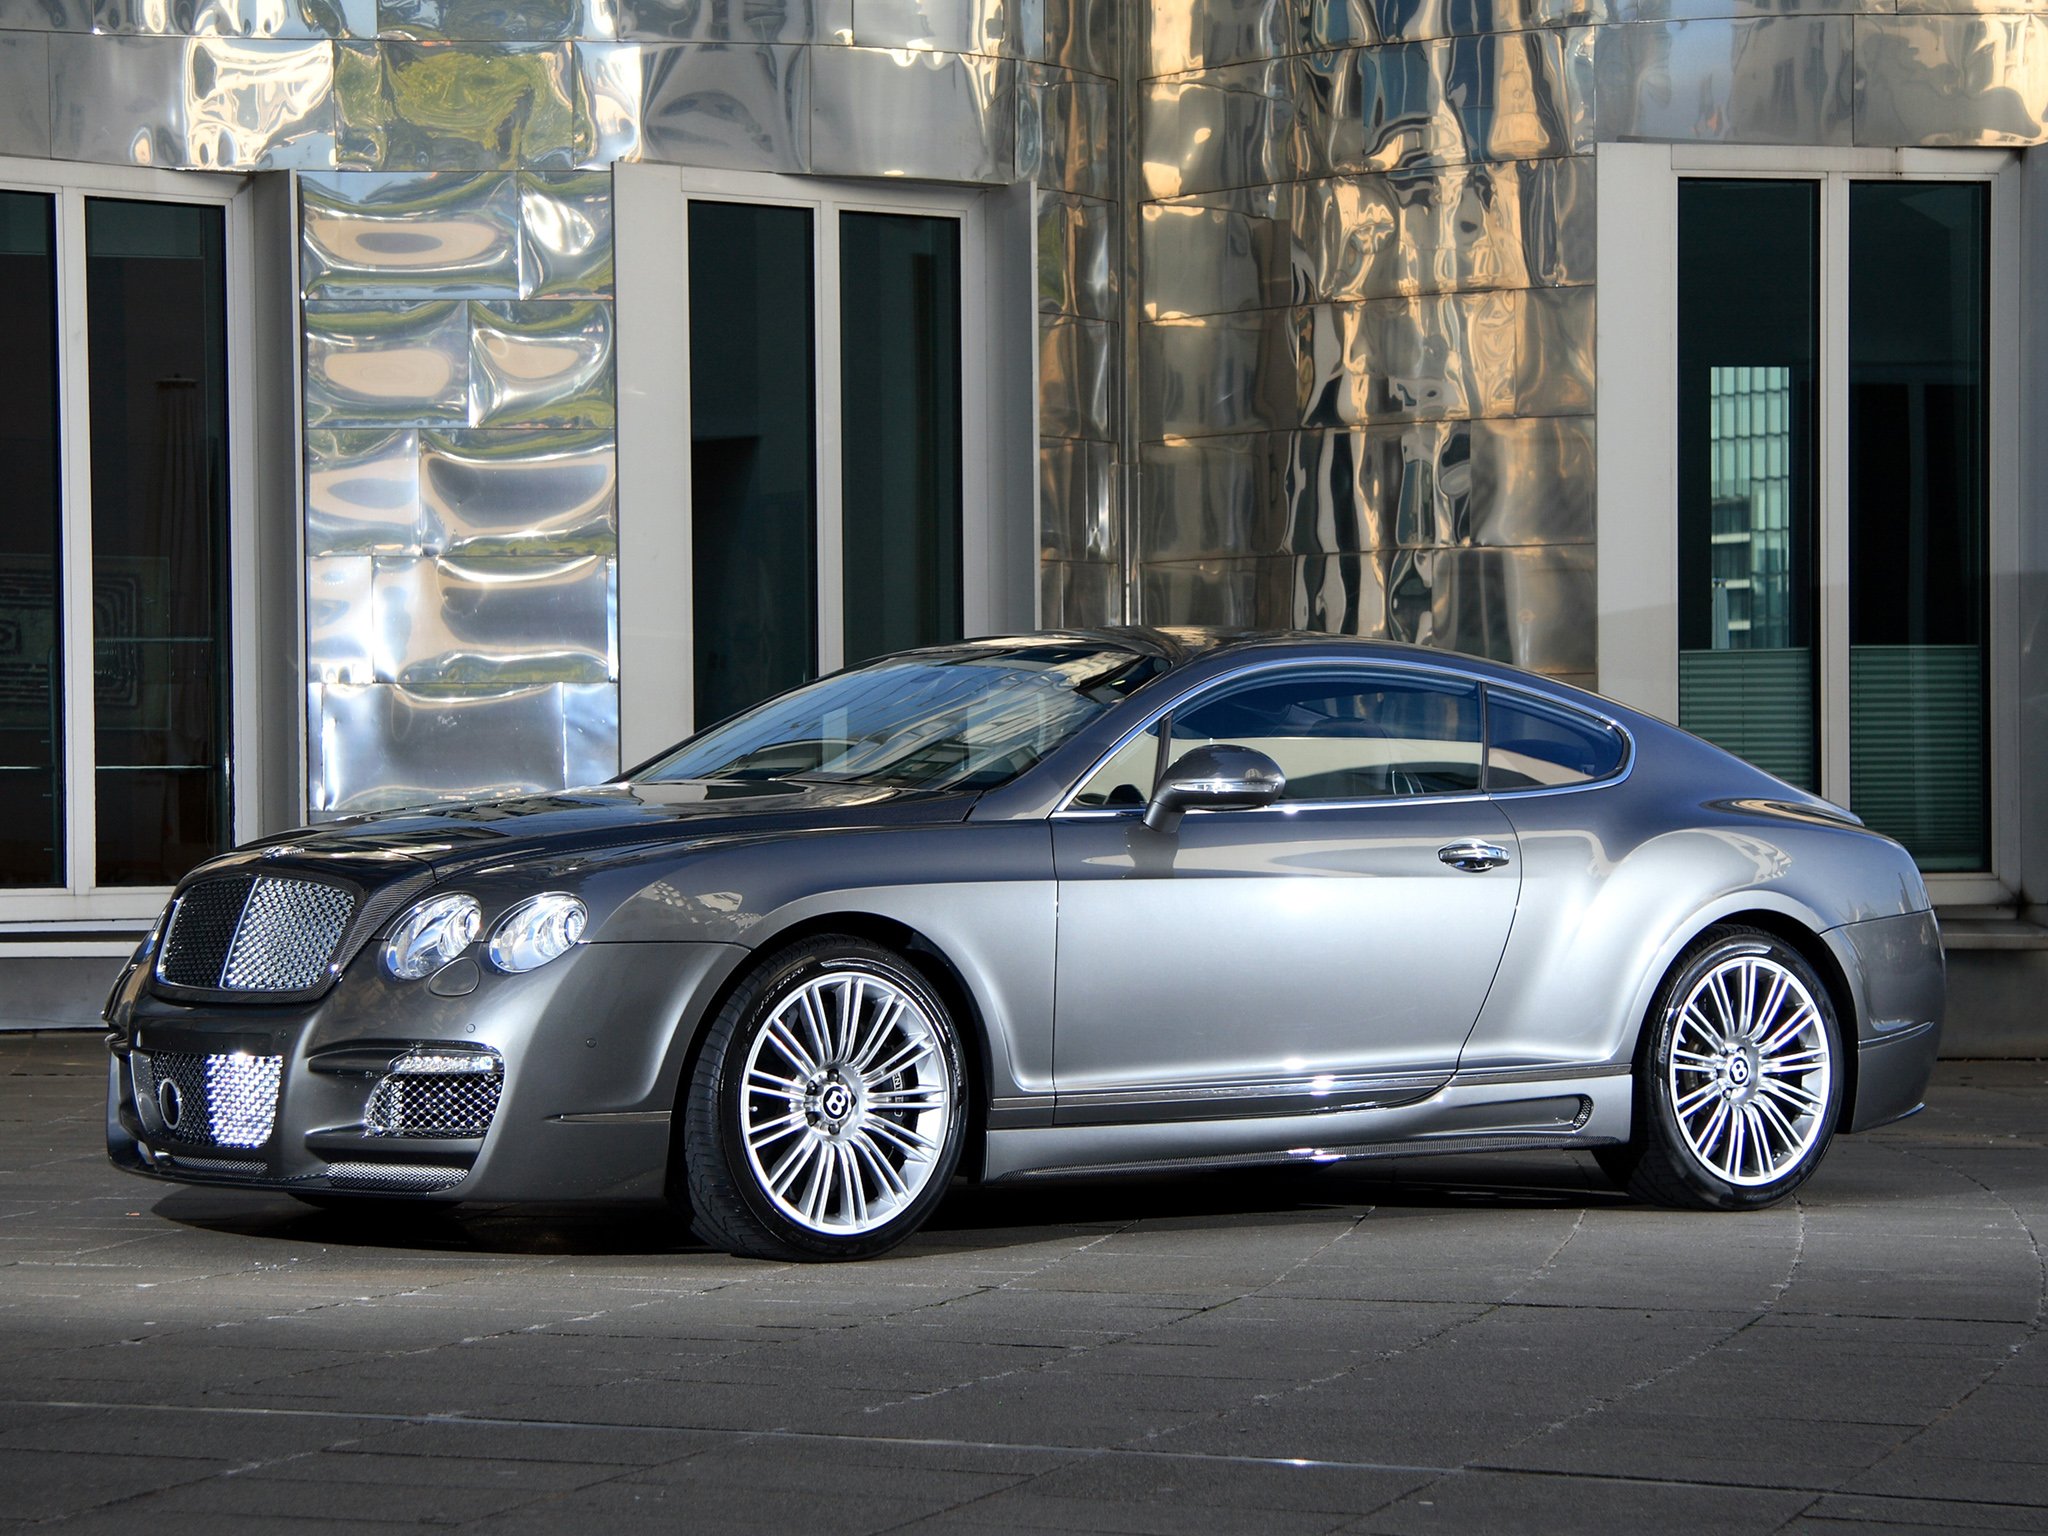 nderson, Germany, Bentley, Gt speed, Elegance, Edition, Cars, Modified, 2010 Wallpaper